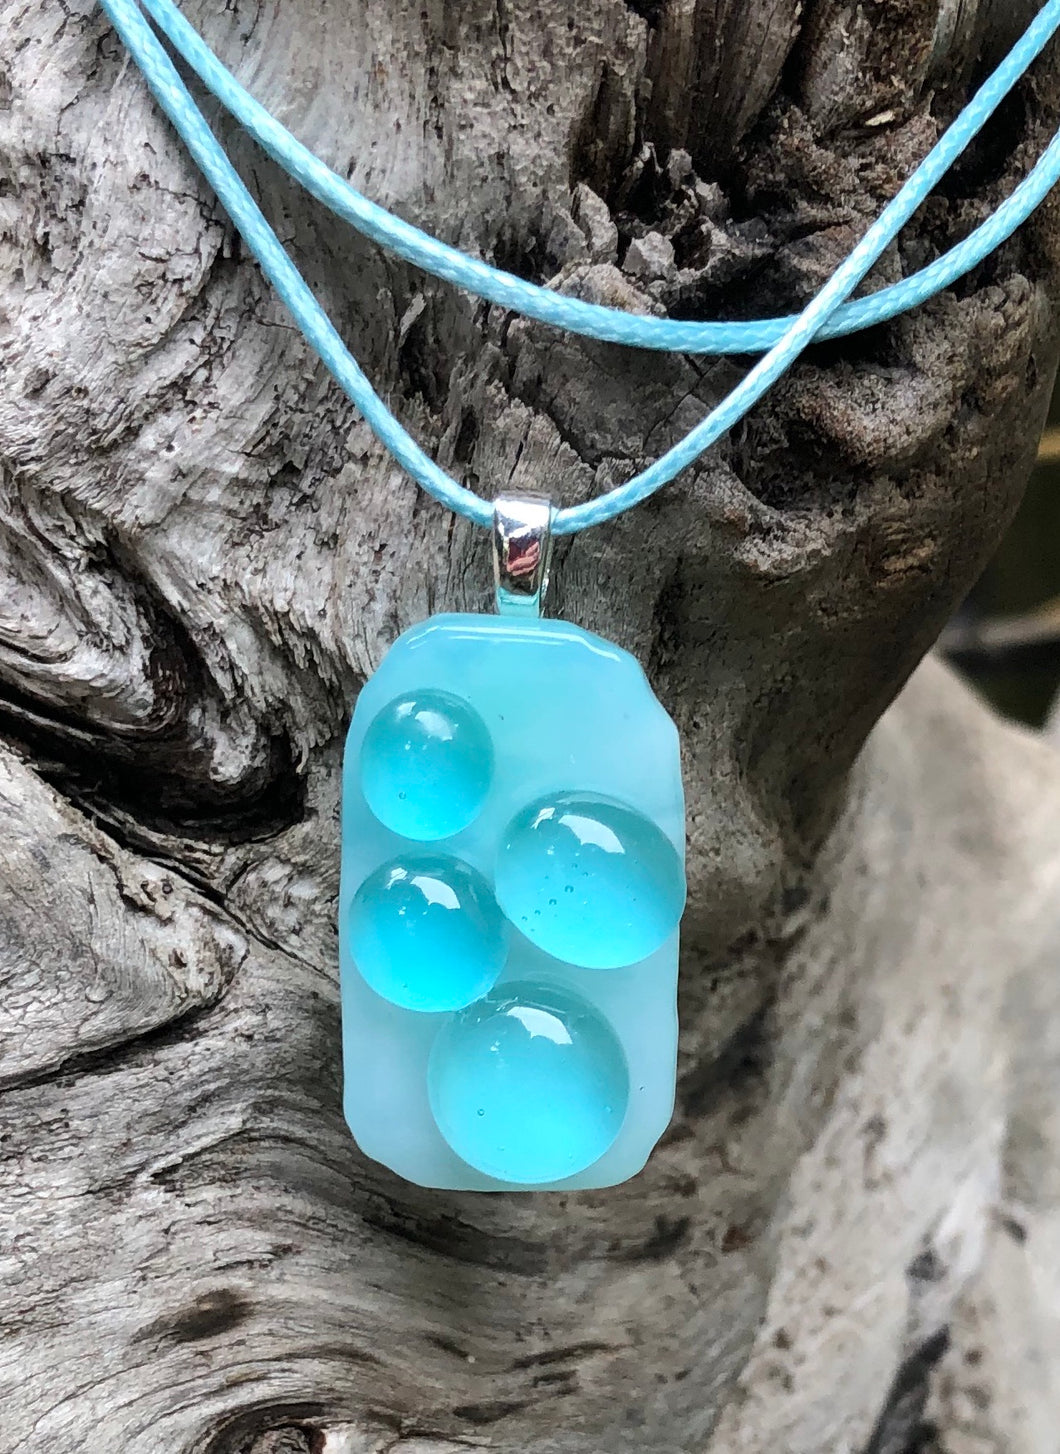 The Bubblicious Aqua Bubbles Fused Glass Pendant measures approximately 1 1/2” x 3/4” on floats on a waxed Irish cotton cord which is adjustable from 17 1/2” to 19 1/4”.